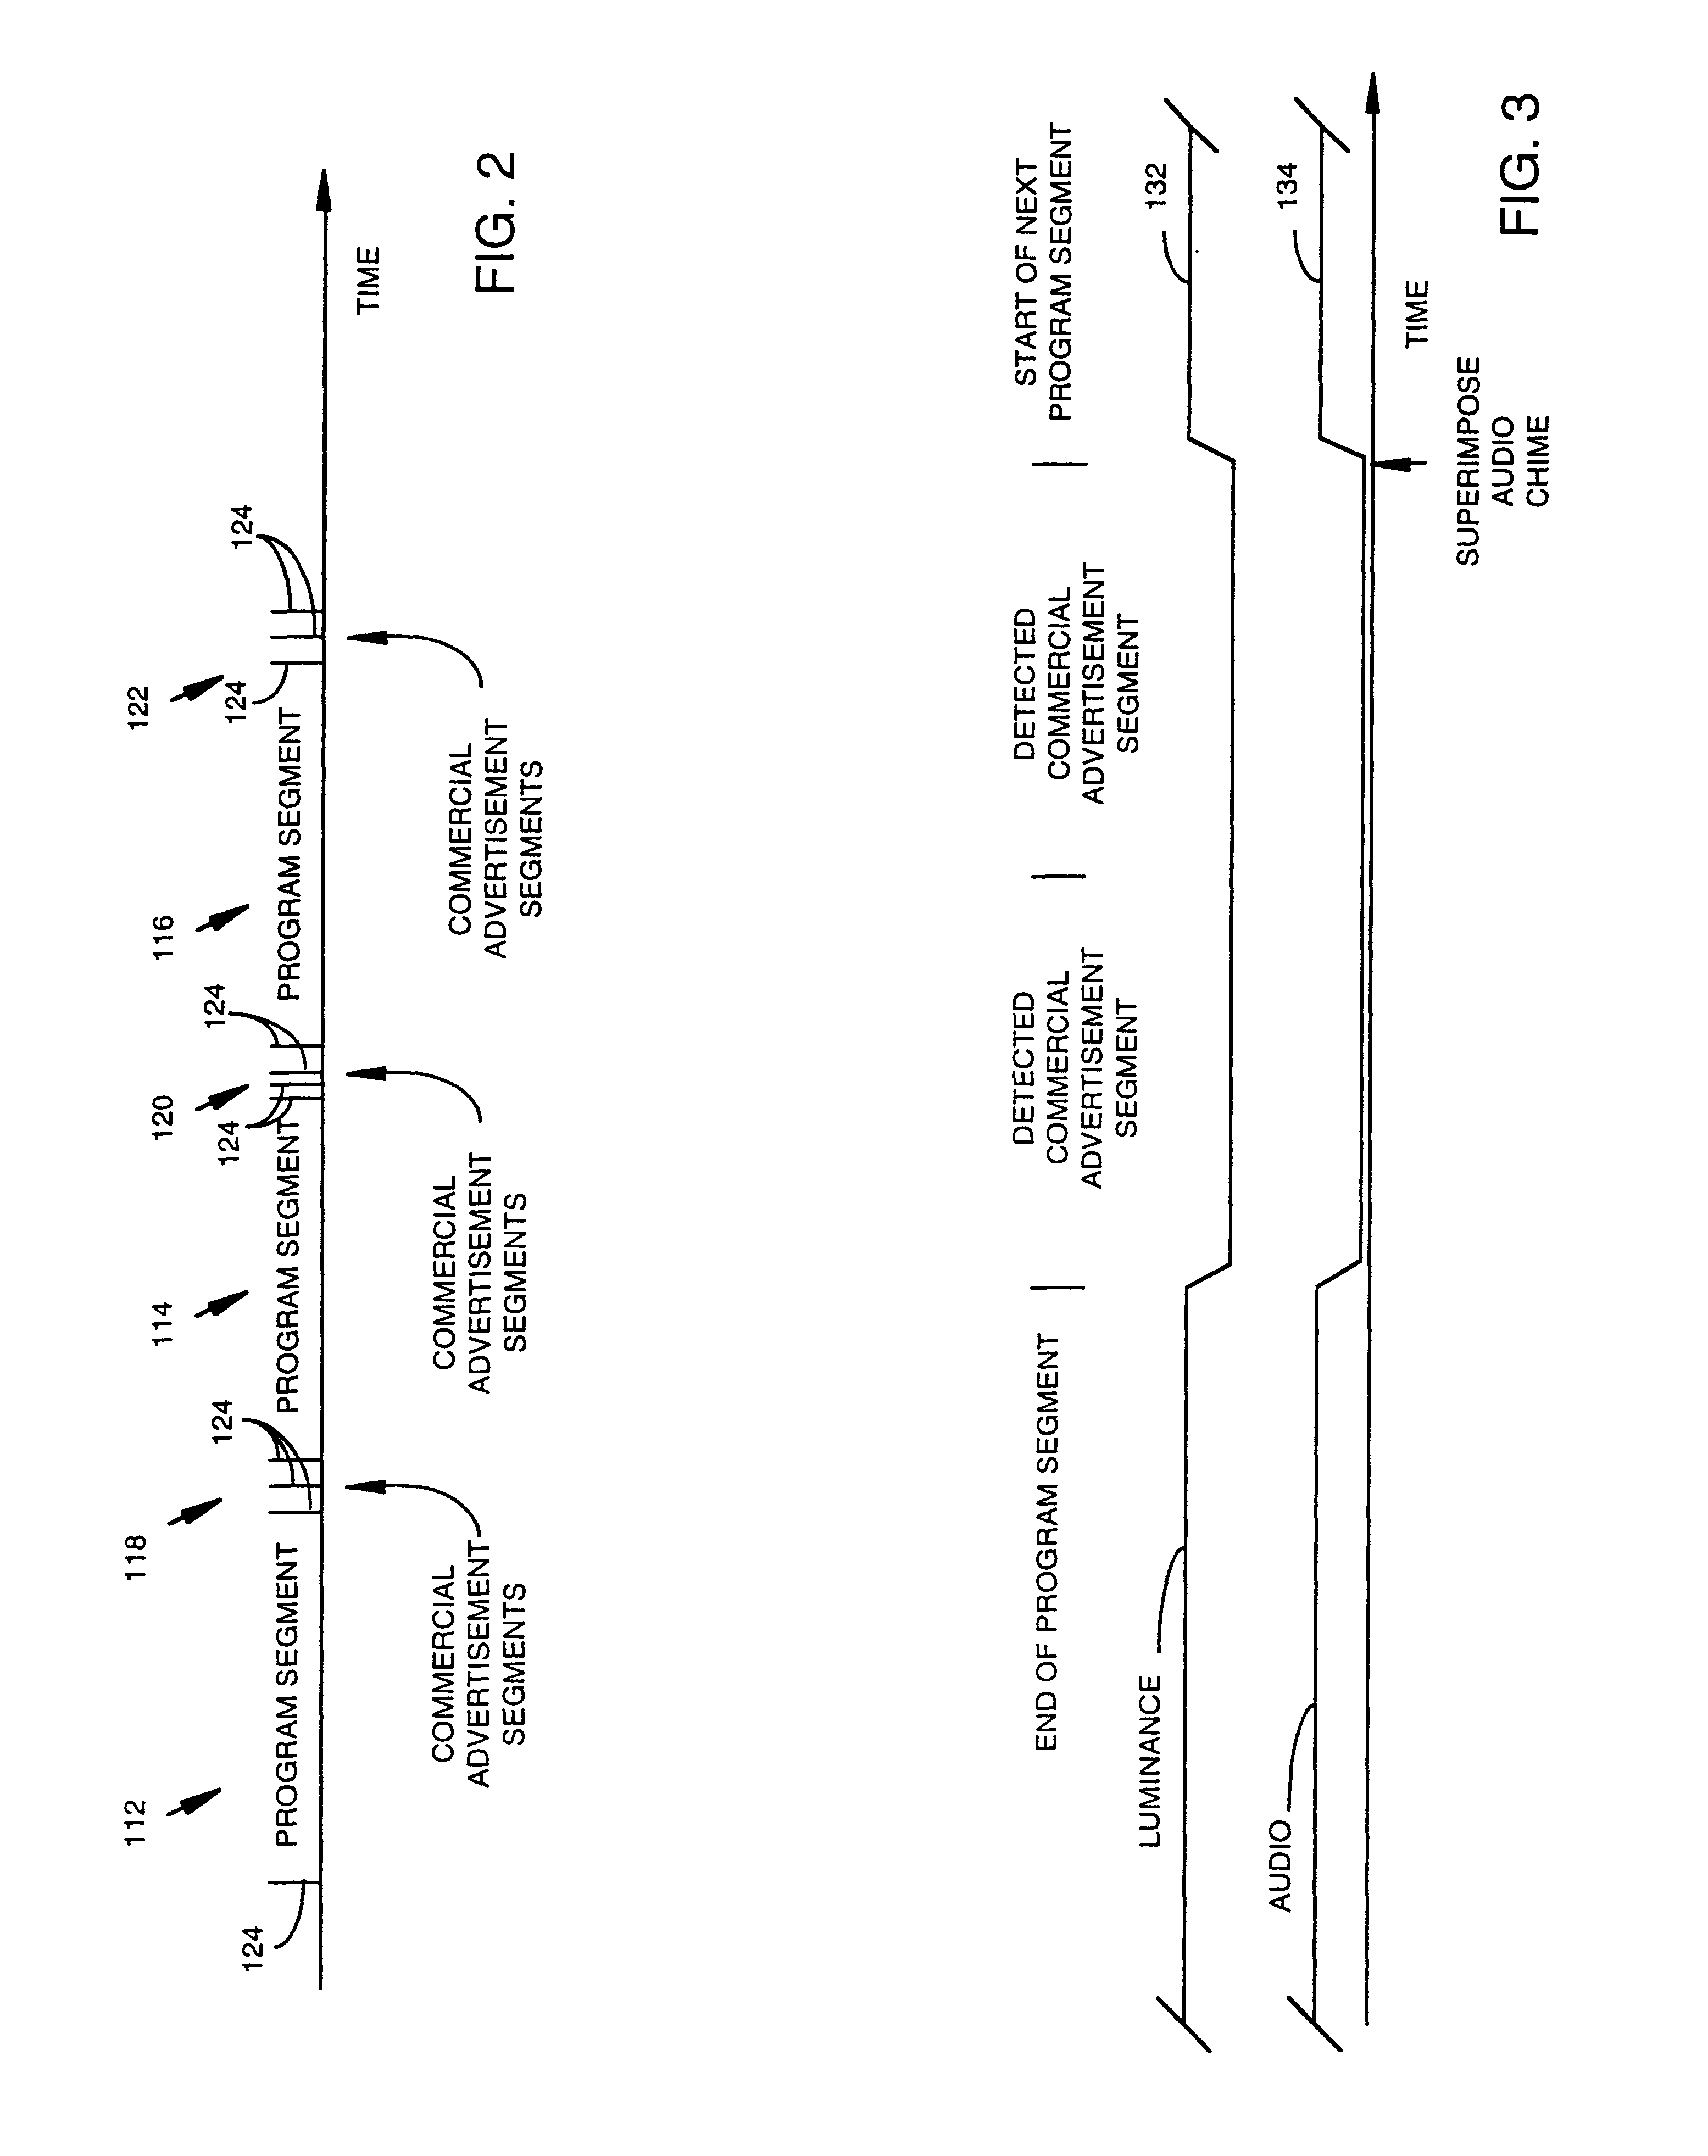 Method and apparatus for automatically identifying and selectively altering segments of a television broadcast signal in real-time